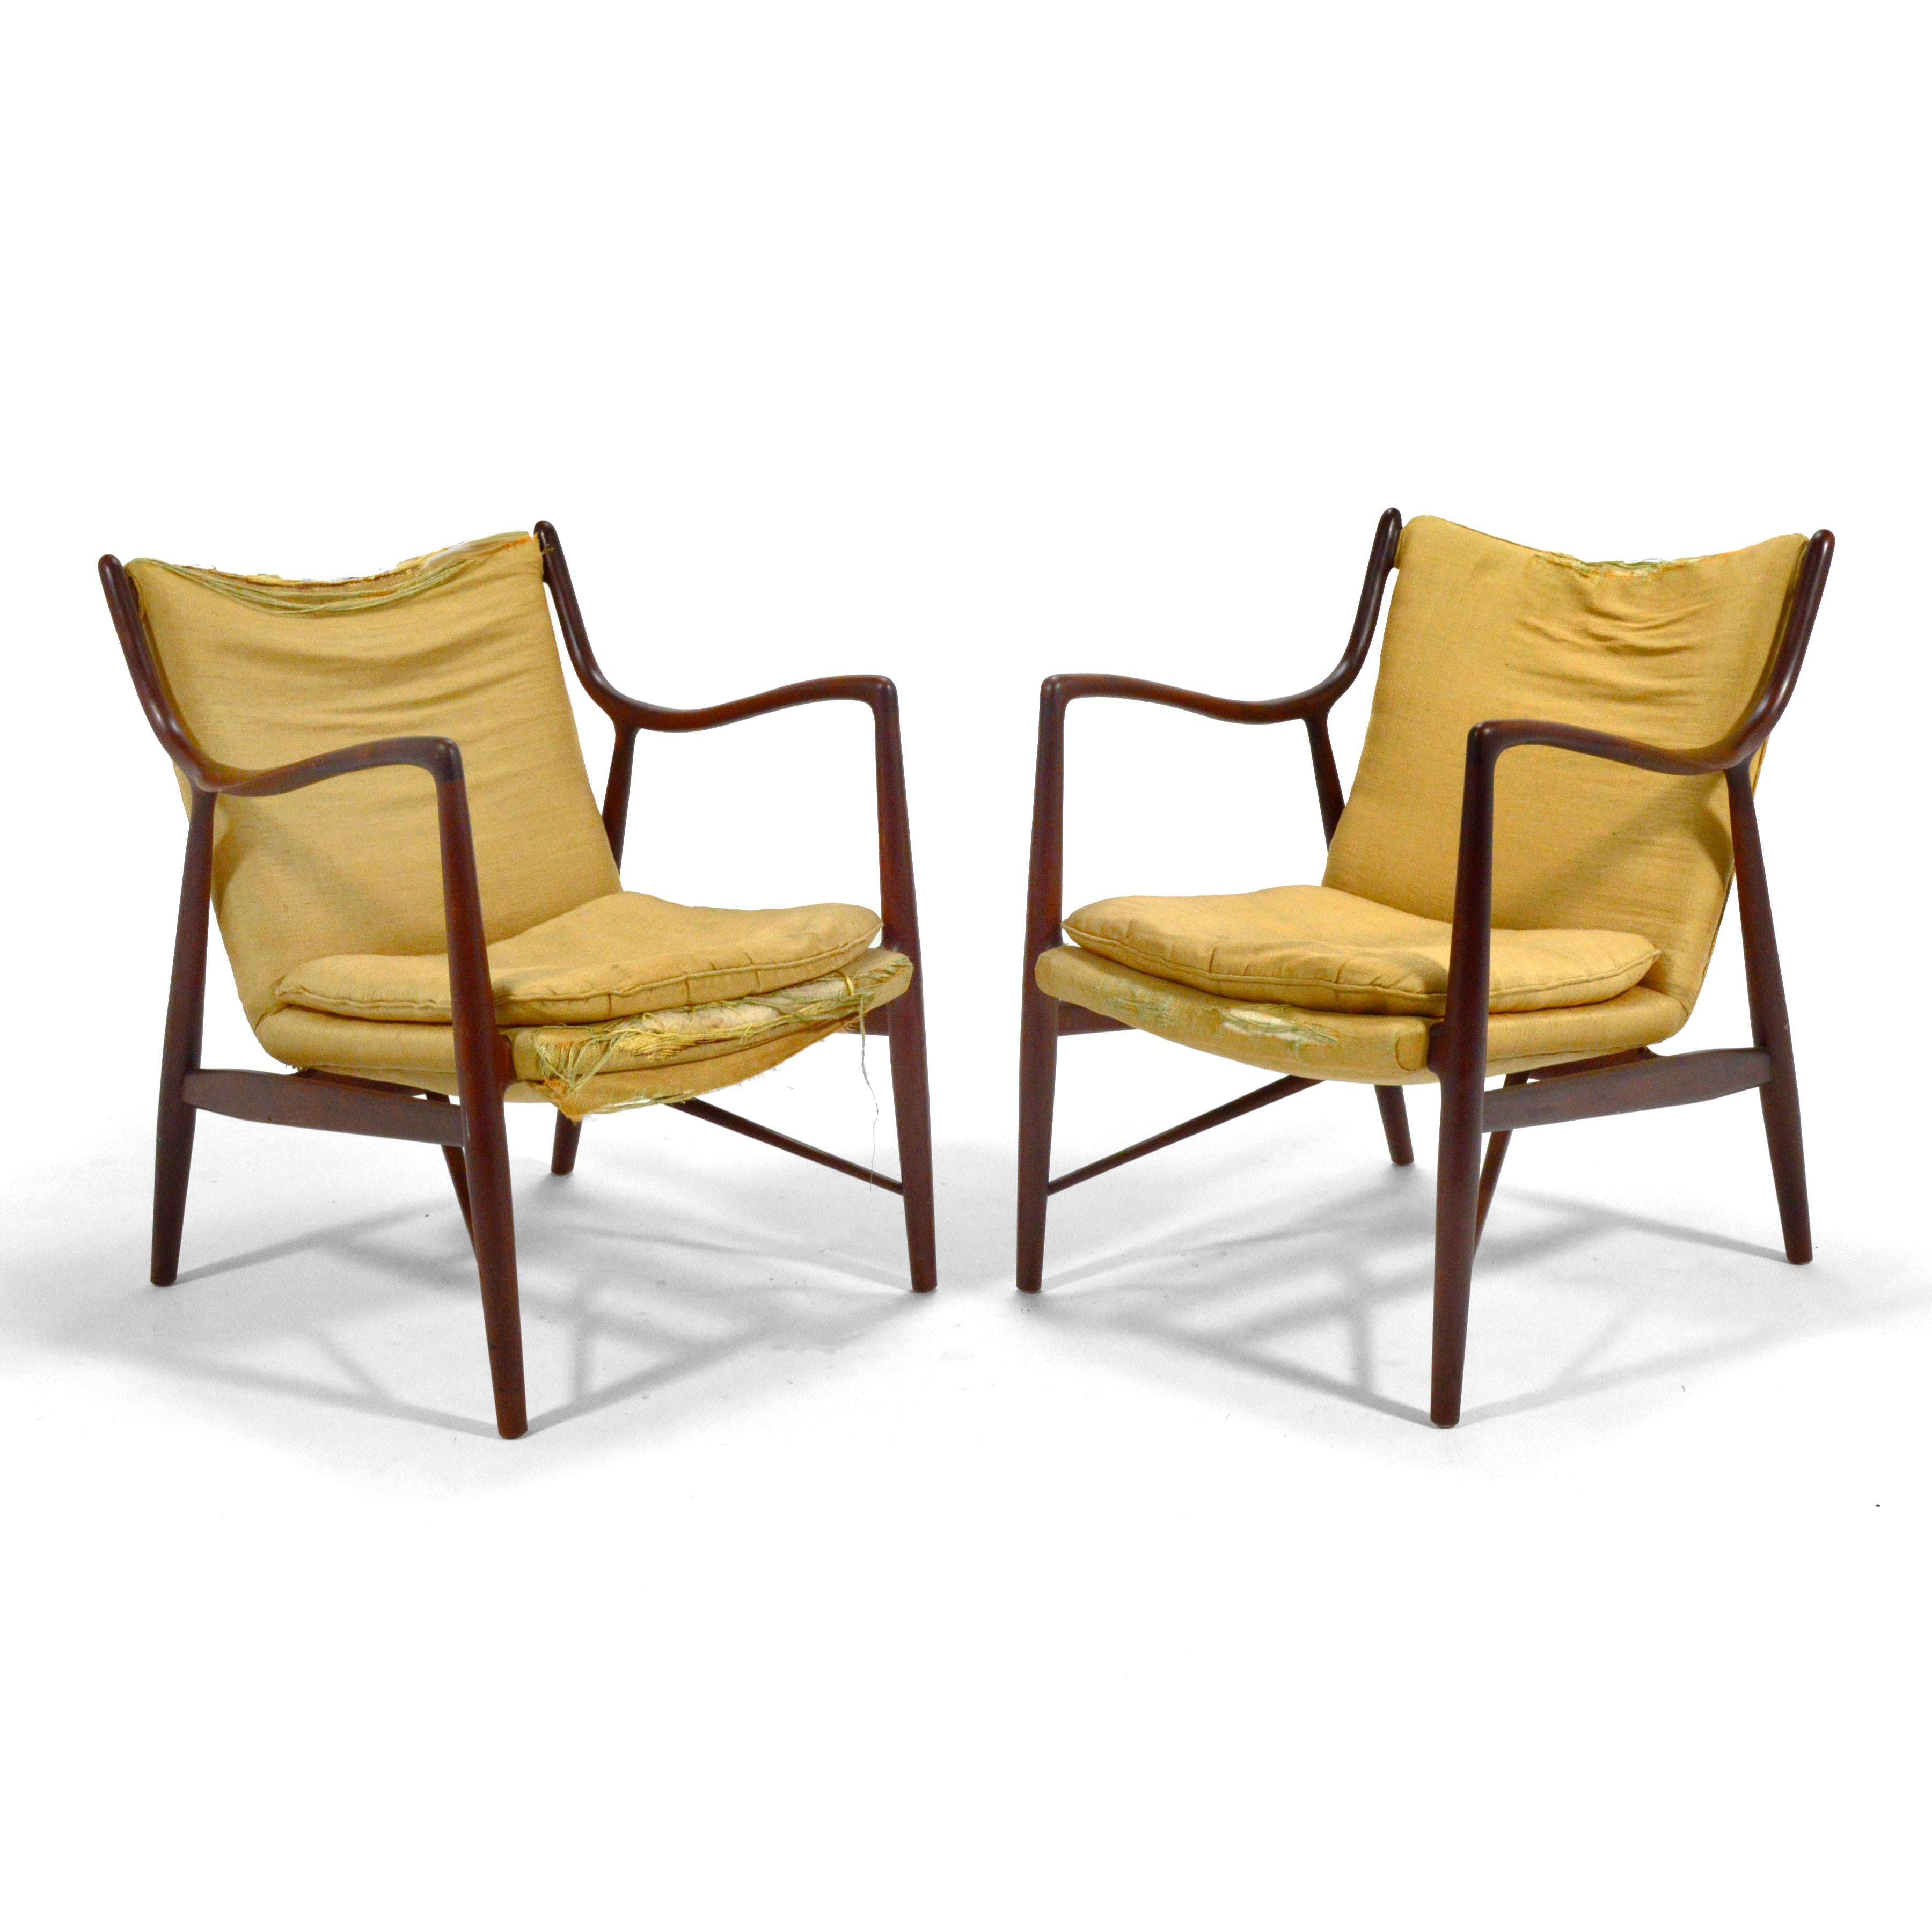 Once described as the most beautiful chair in the world, the number 45 chair is certainly one of Finn Juhl's most important designs. Acknowledged as the father of Danish modern design, the architect worked closely with cabinetmaker Niels Vodder to